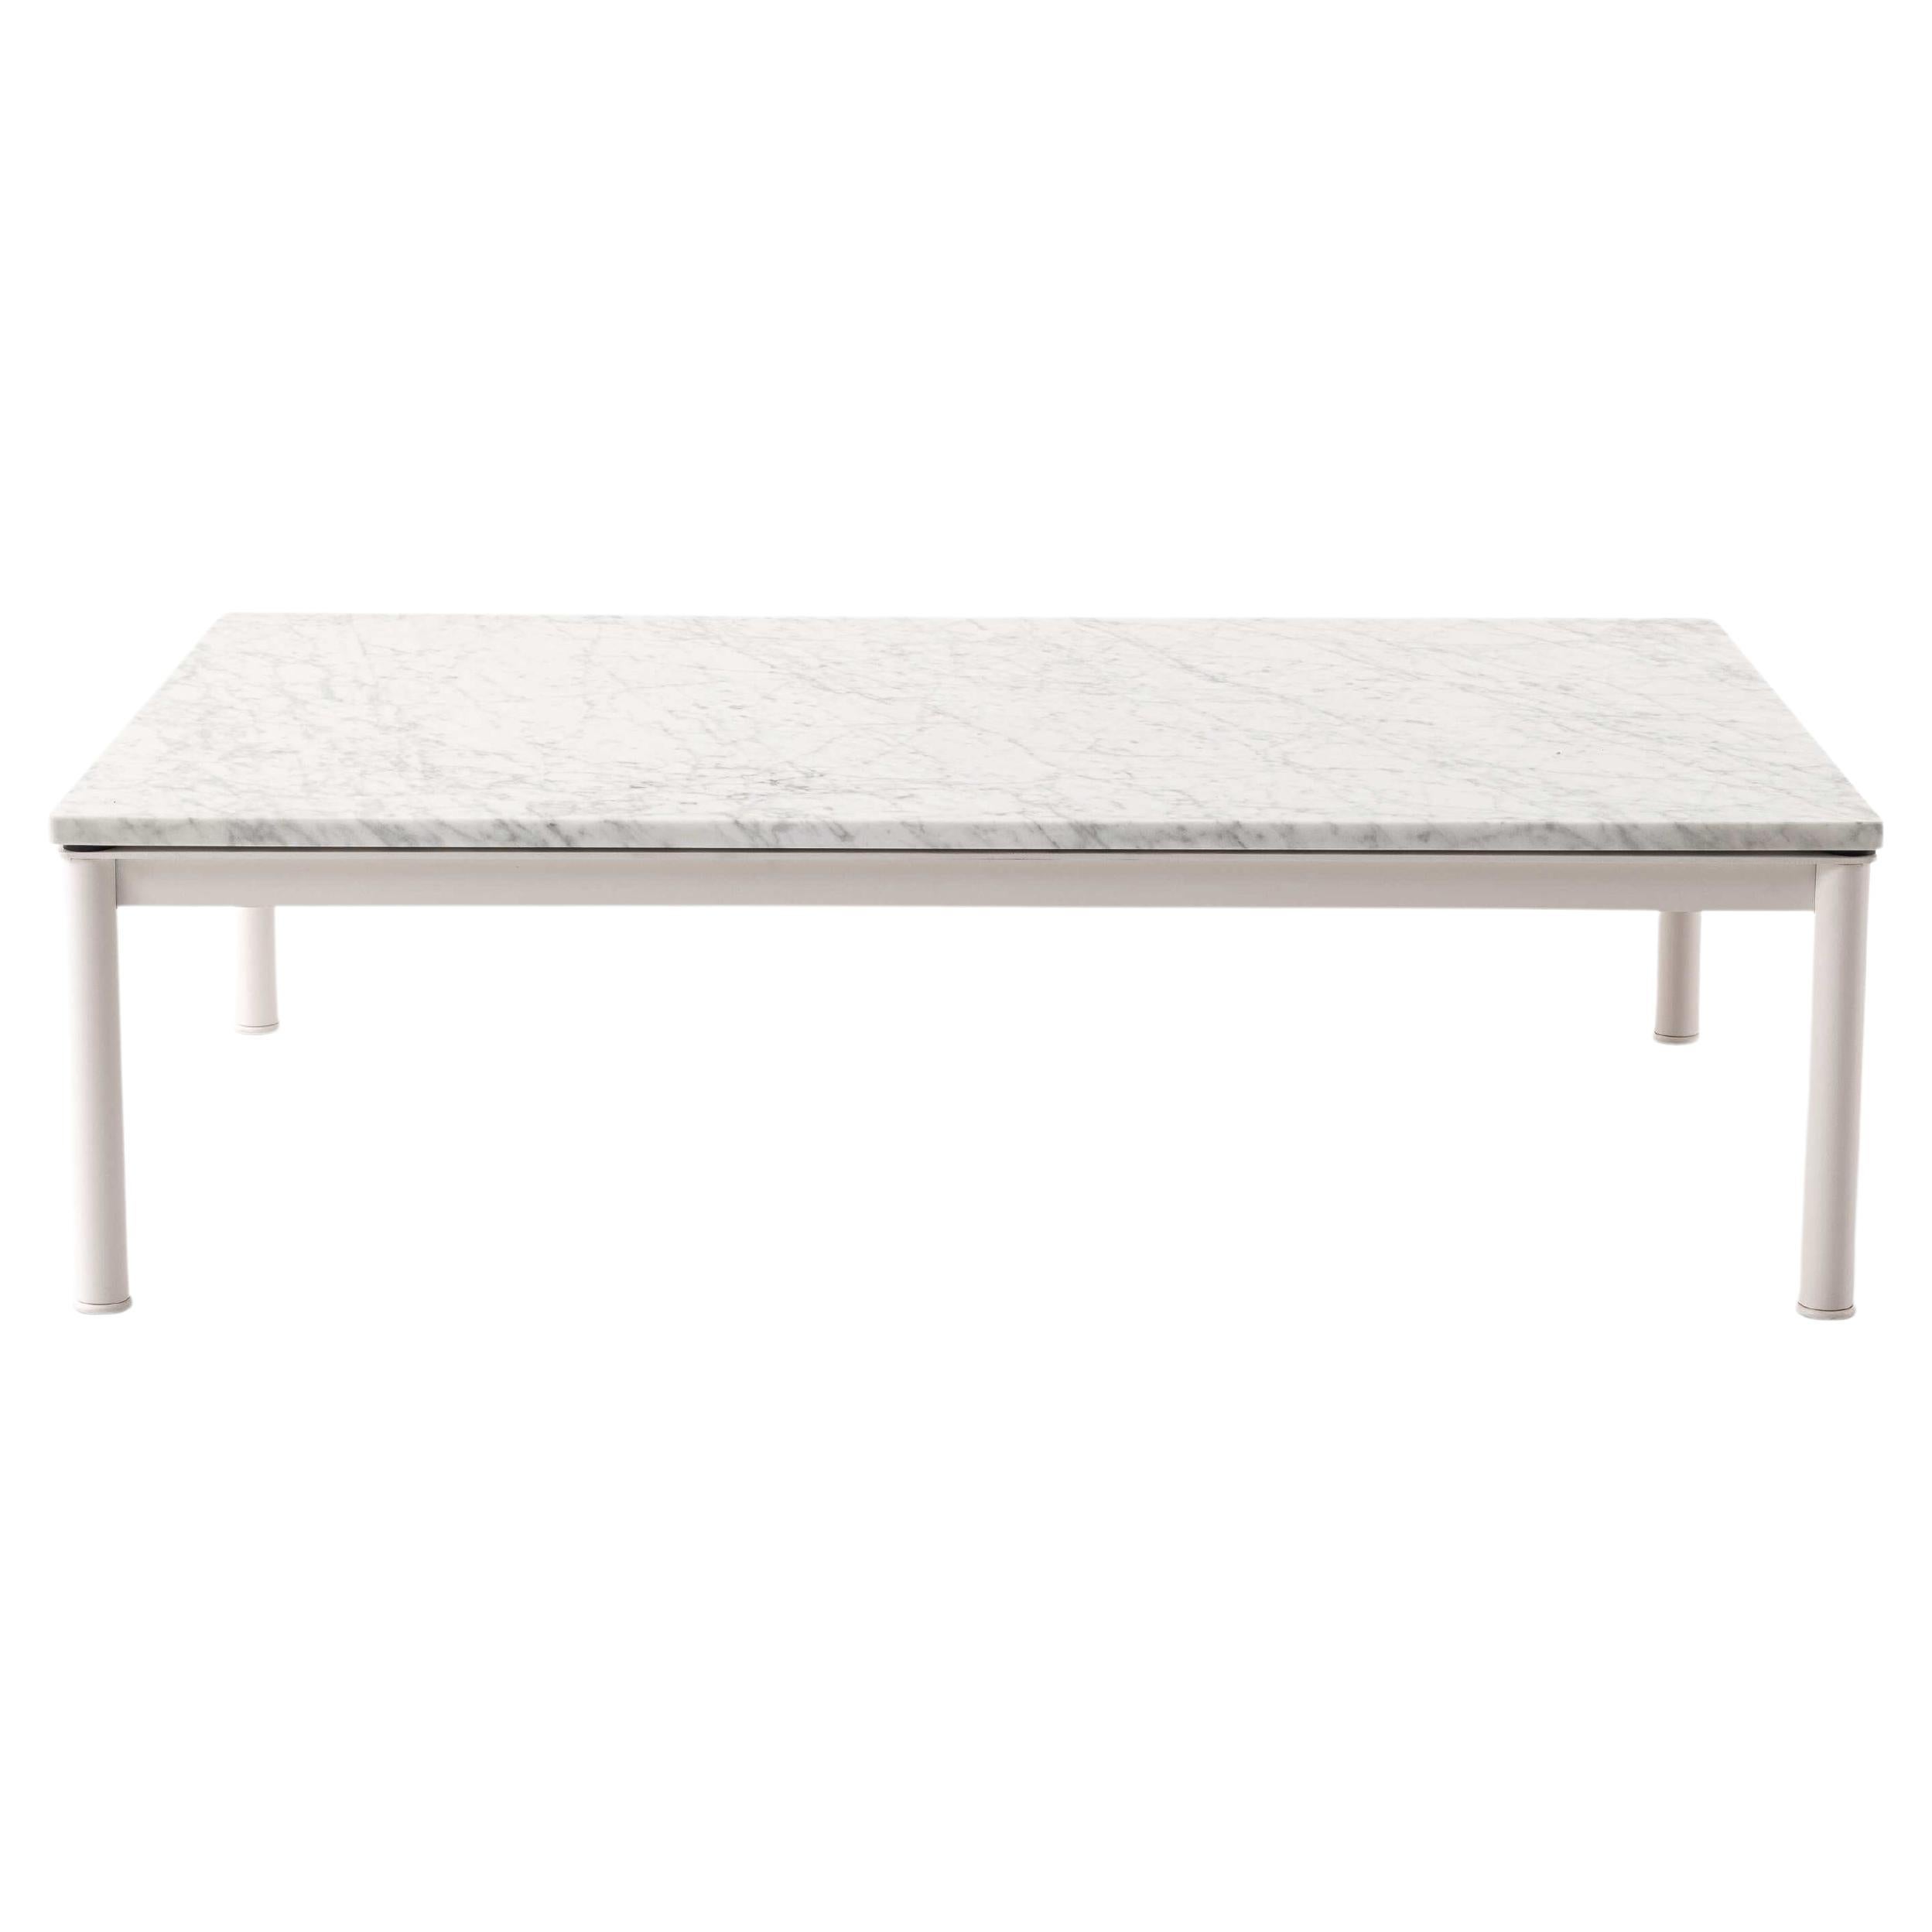 Le Corbusier, Pierre Jeanneret, Charlotte Perriand Lc10 Ivory Table by Cassina